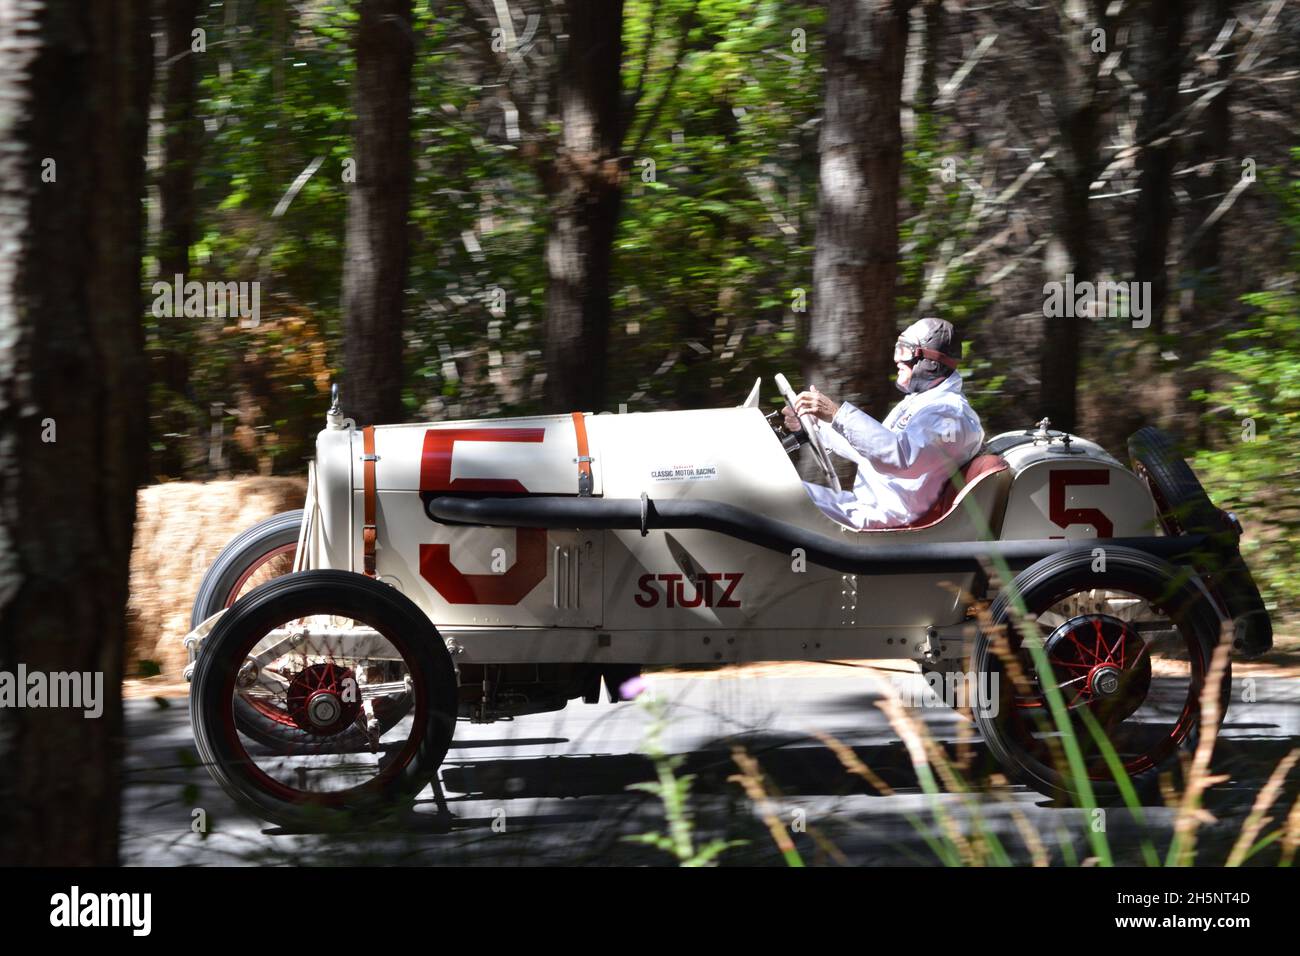 Al Unser Jr, 2 time Indy winner driving 1a 915 Stutz owned by the Southward motor museum, Rod Millen's Leadfoot Festival hill-climb 5th Feb 2017 NZ Stock Photo